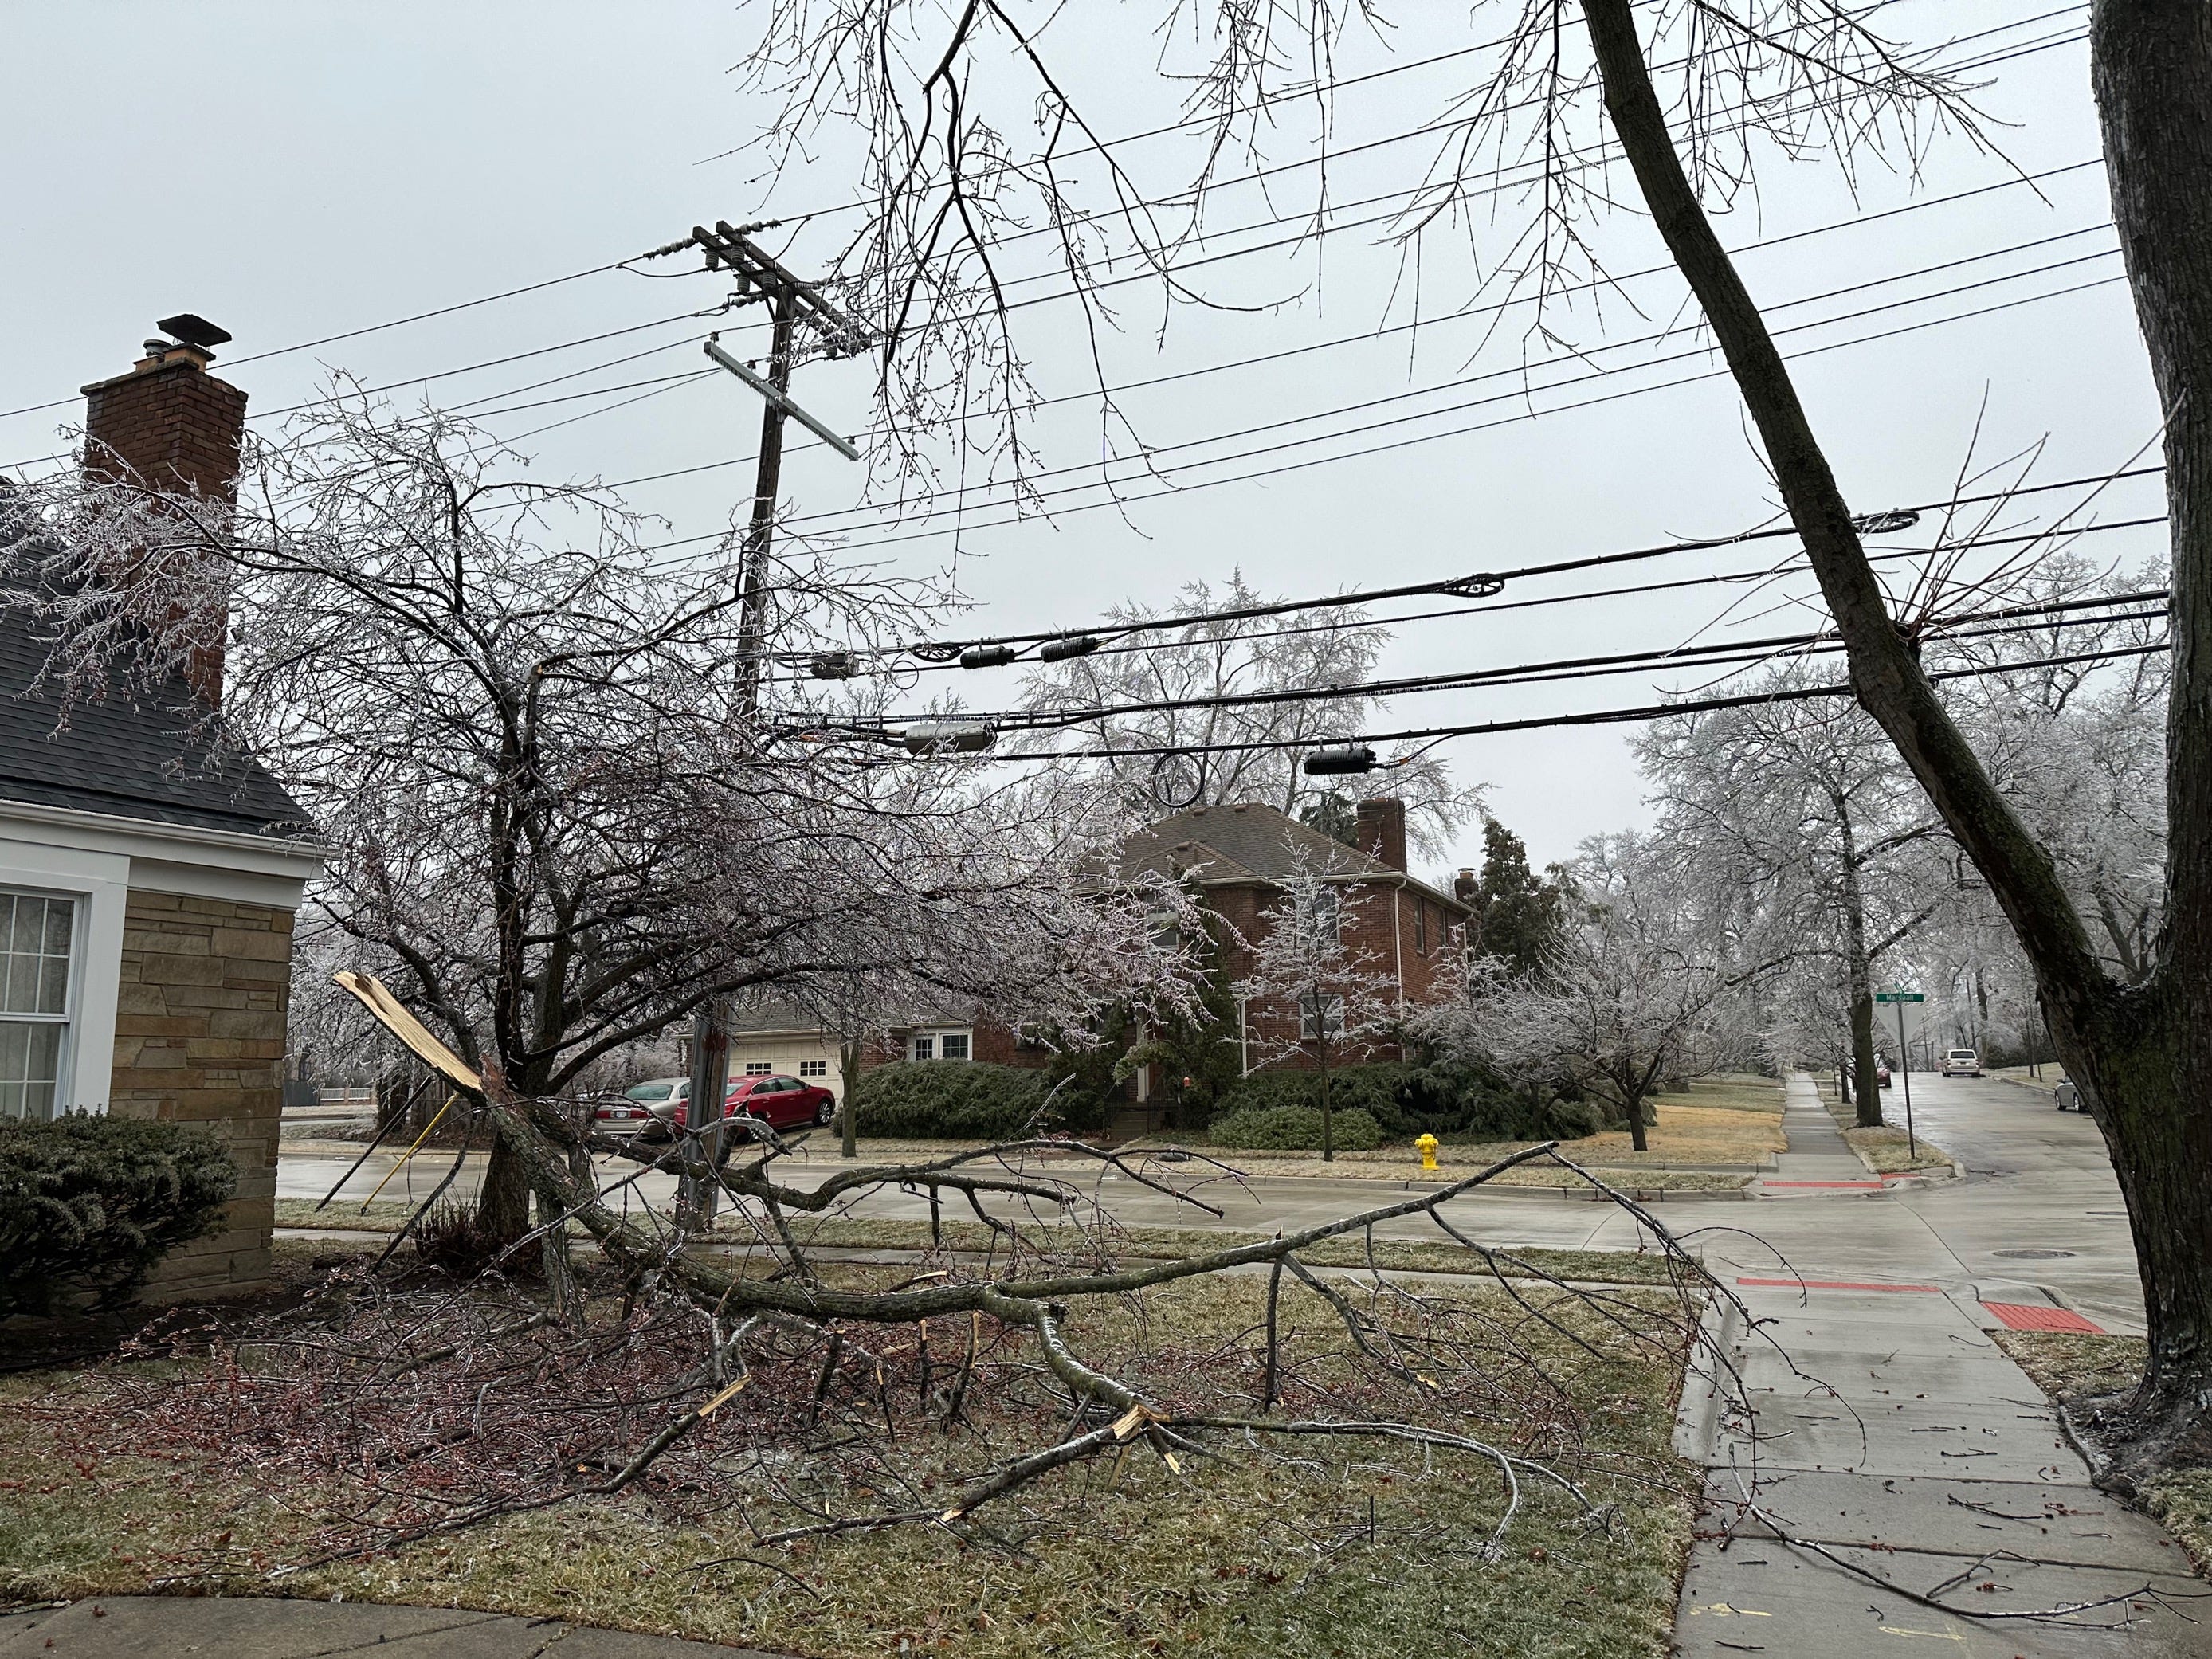 A downed tree branch created a mess in Dearborn after Wednesday's ice storm.